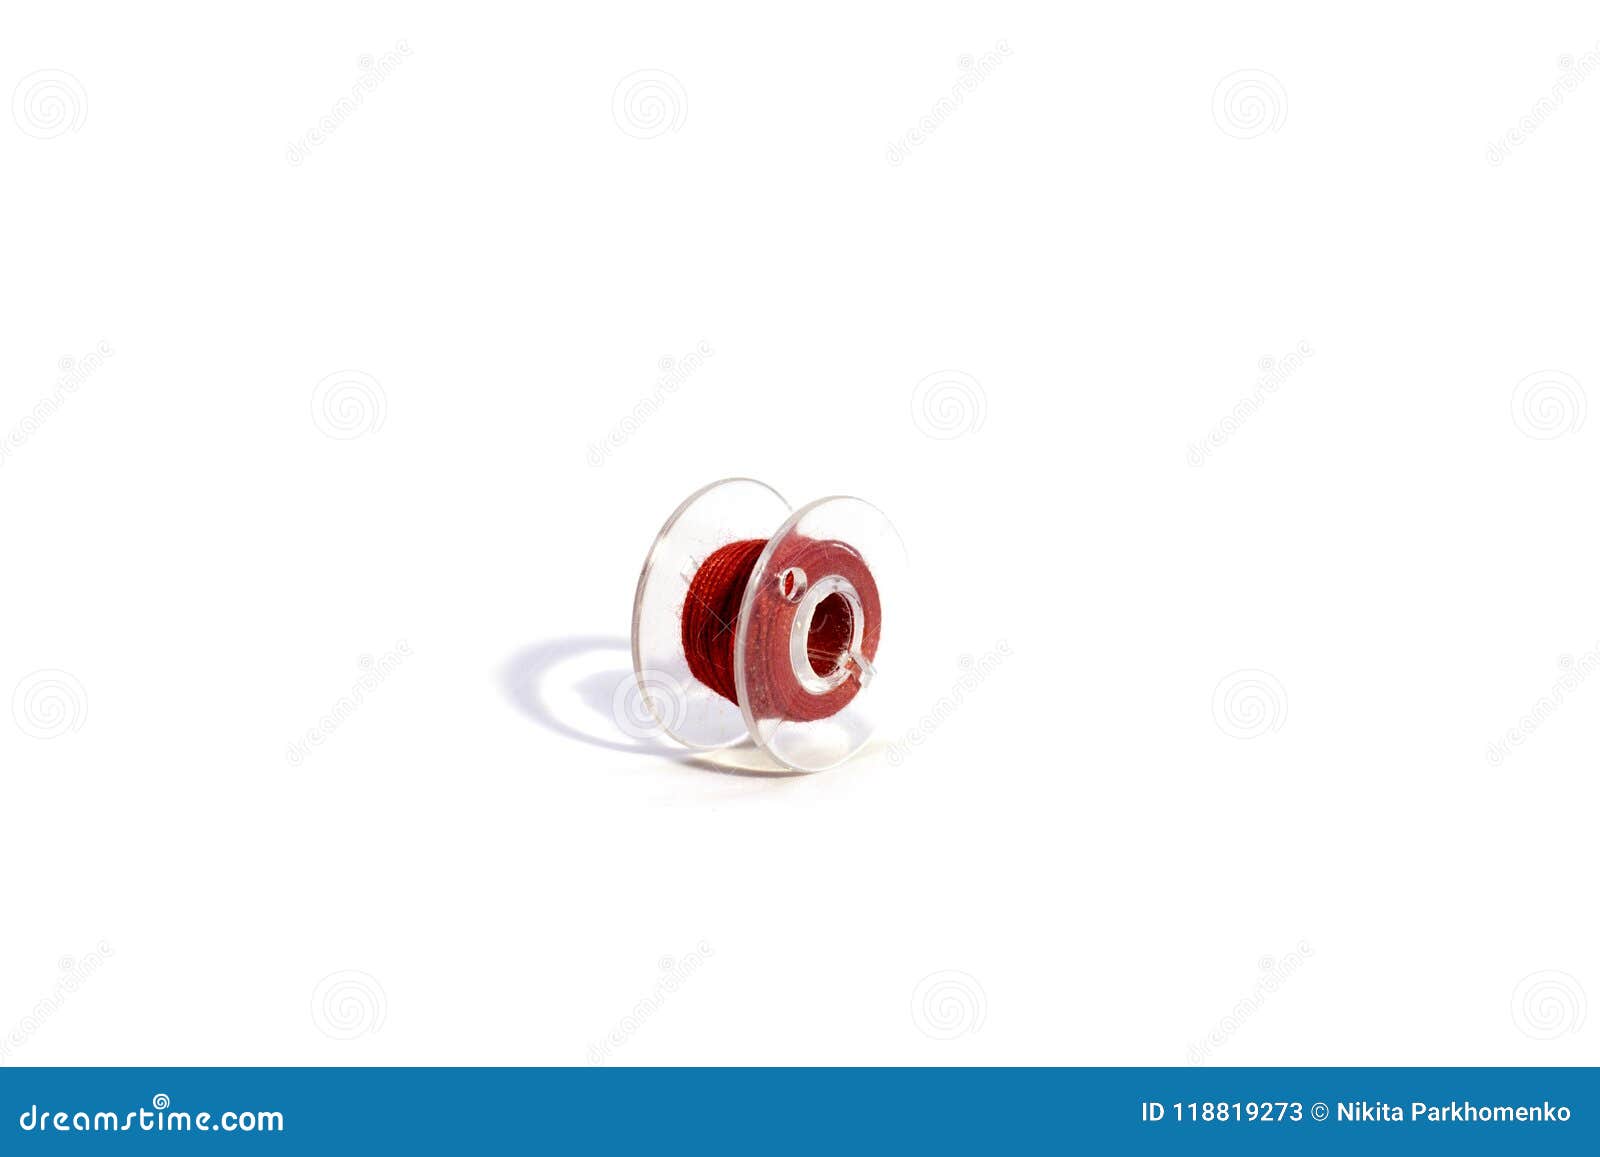 red spool of thread